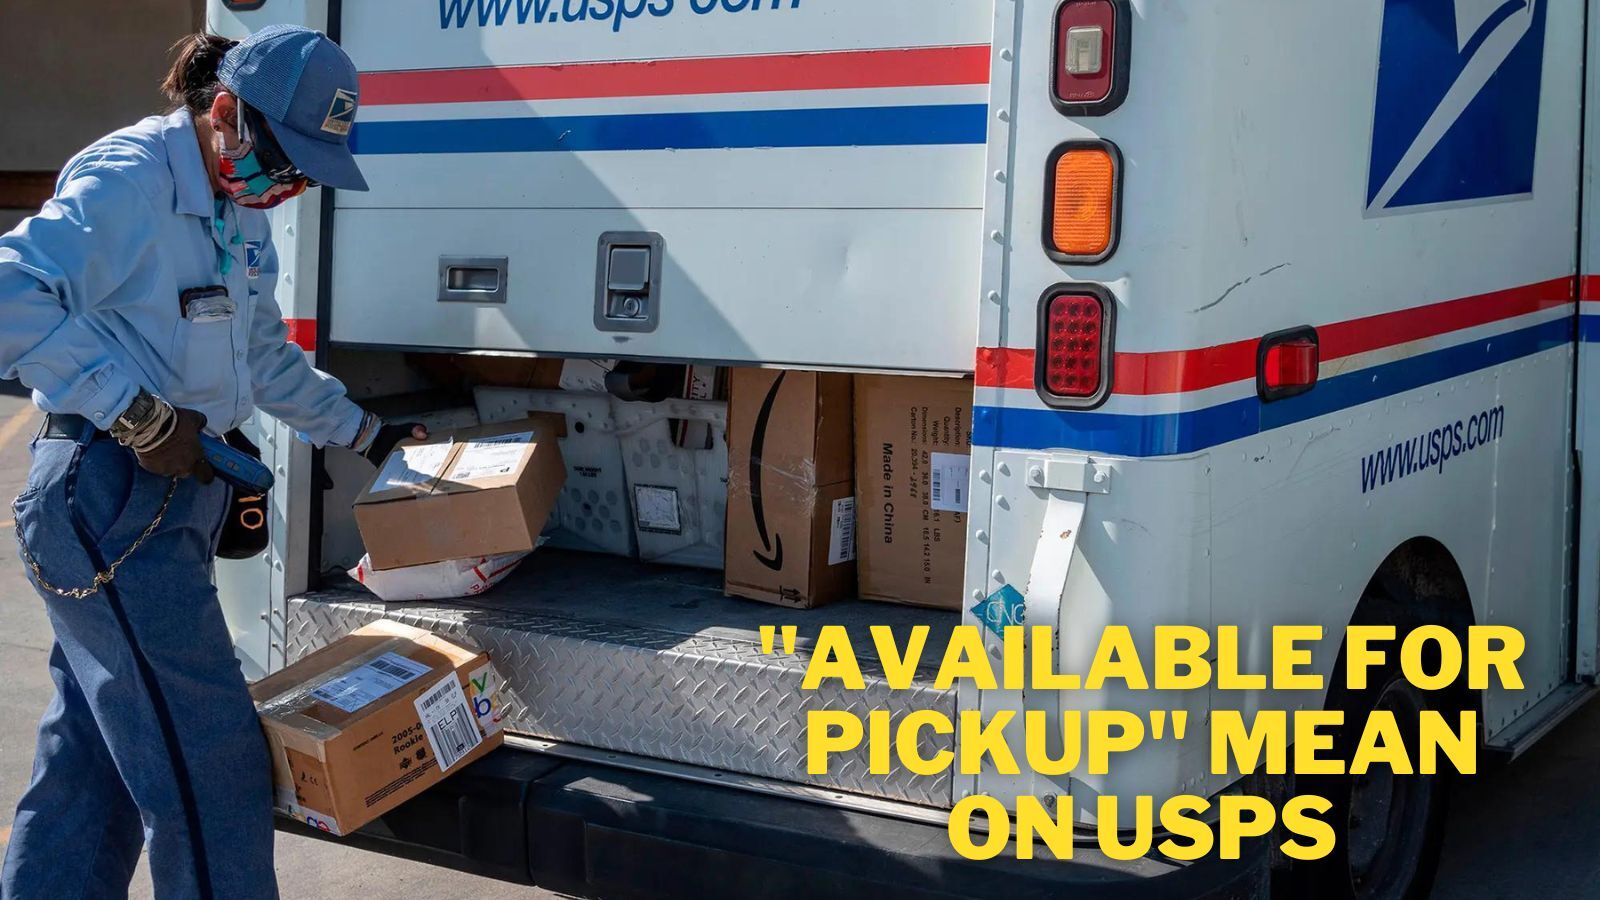 What Does "Available for Pickup" Mean on USPS?